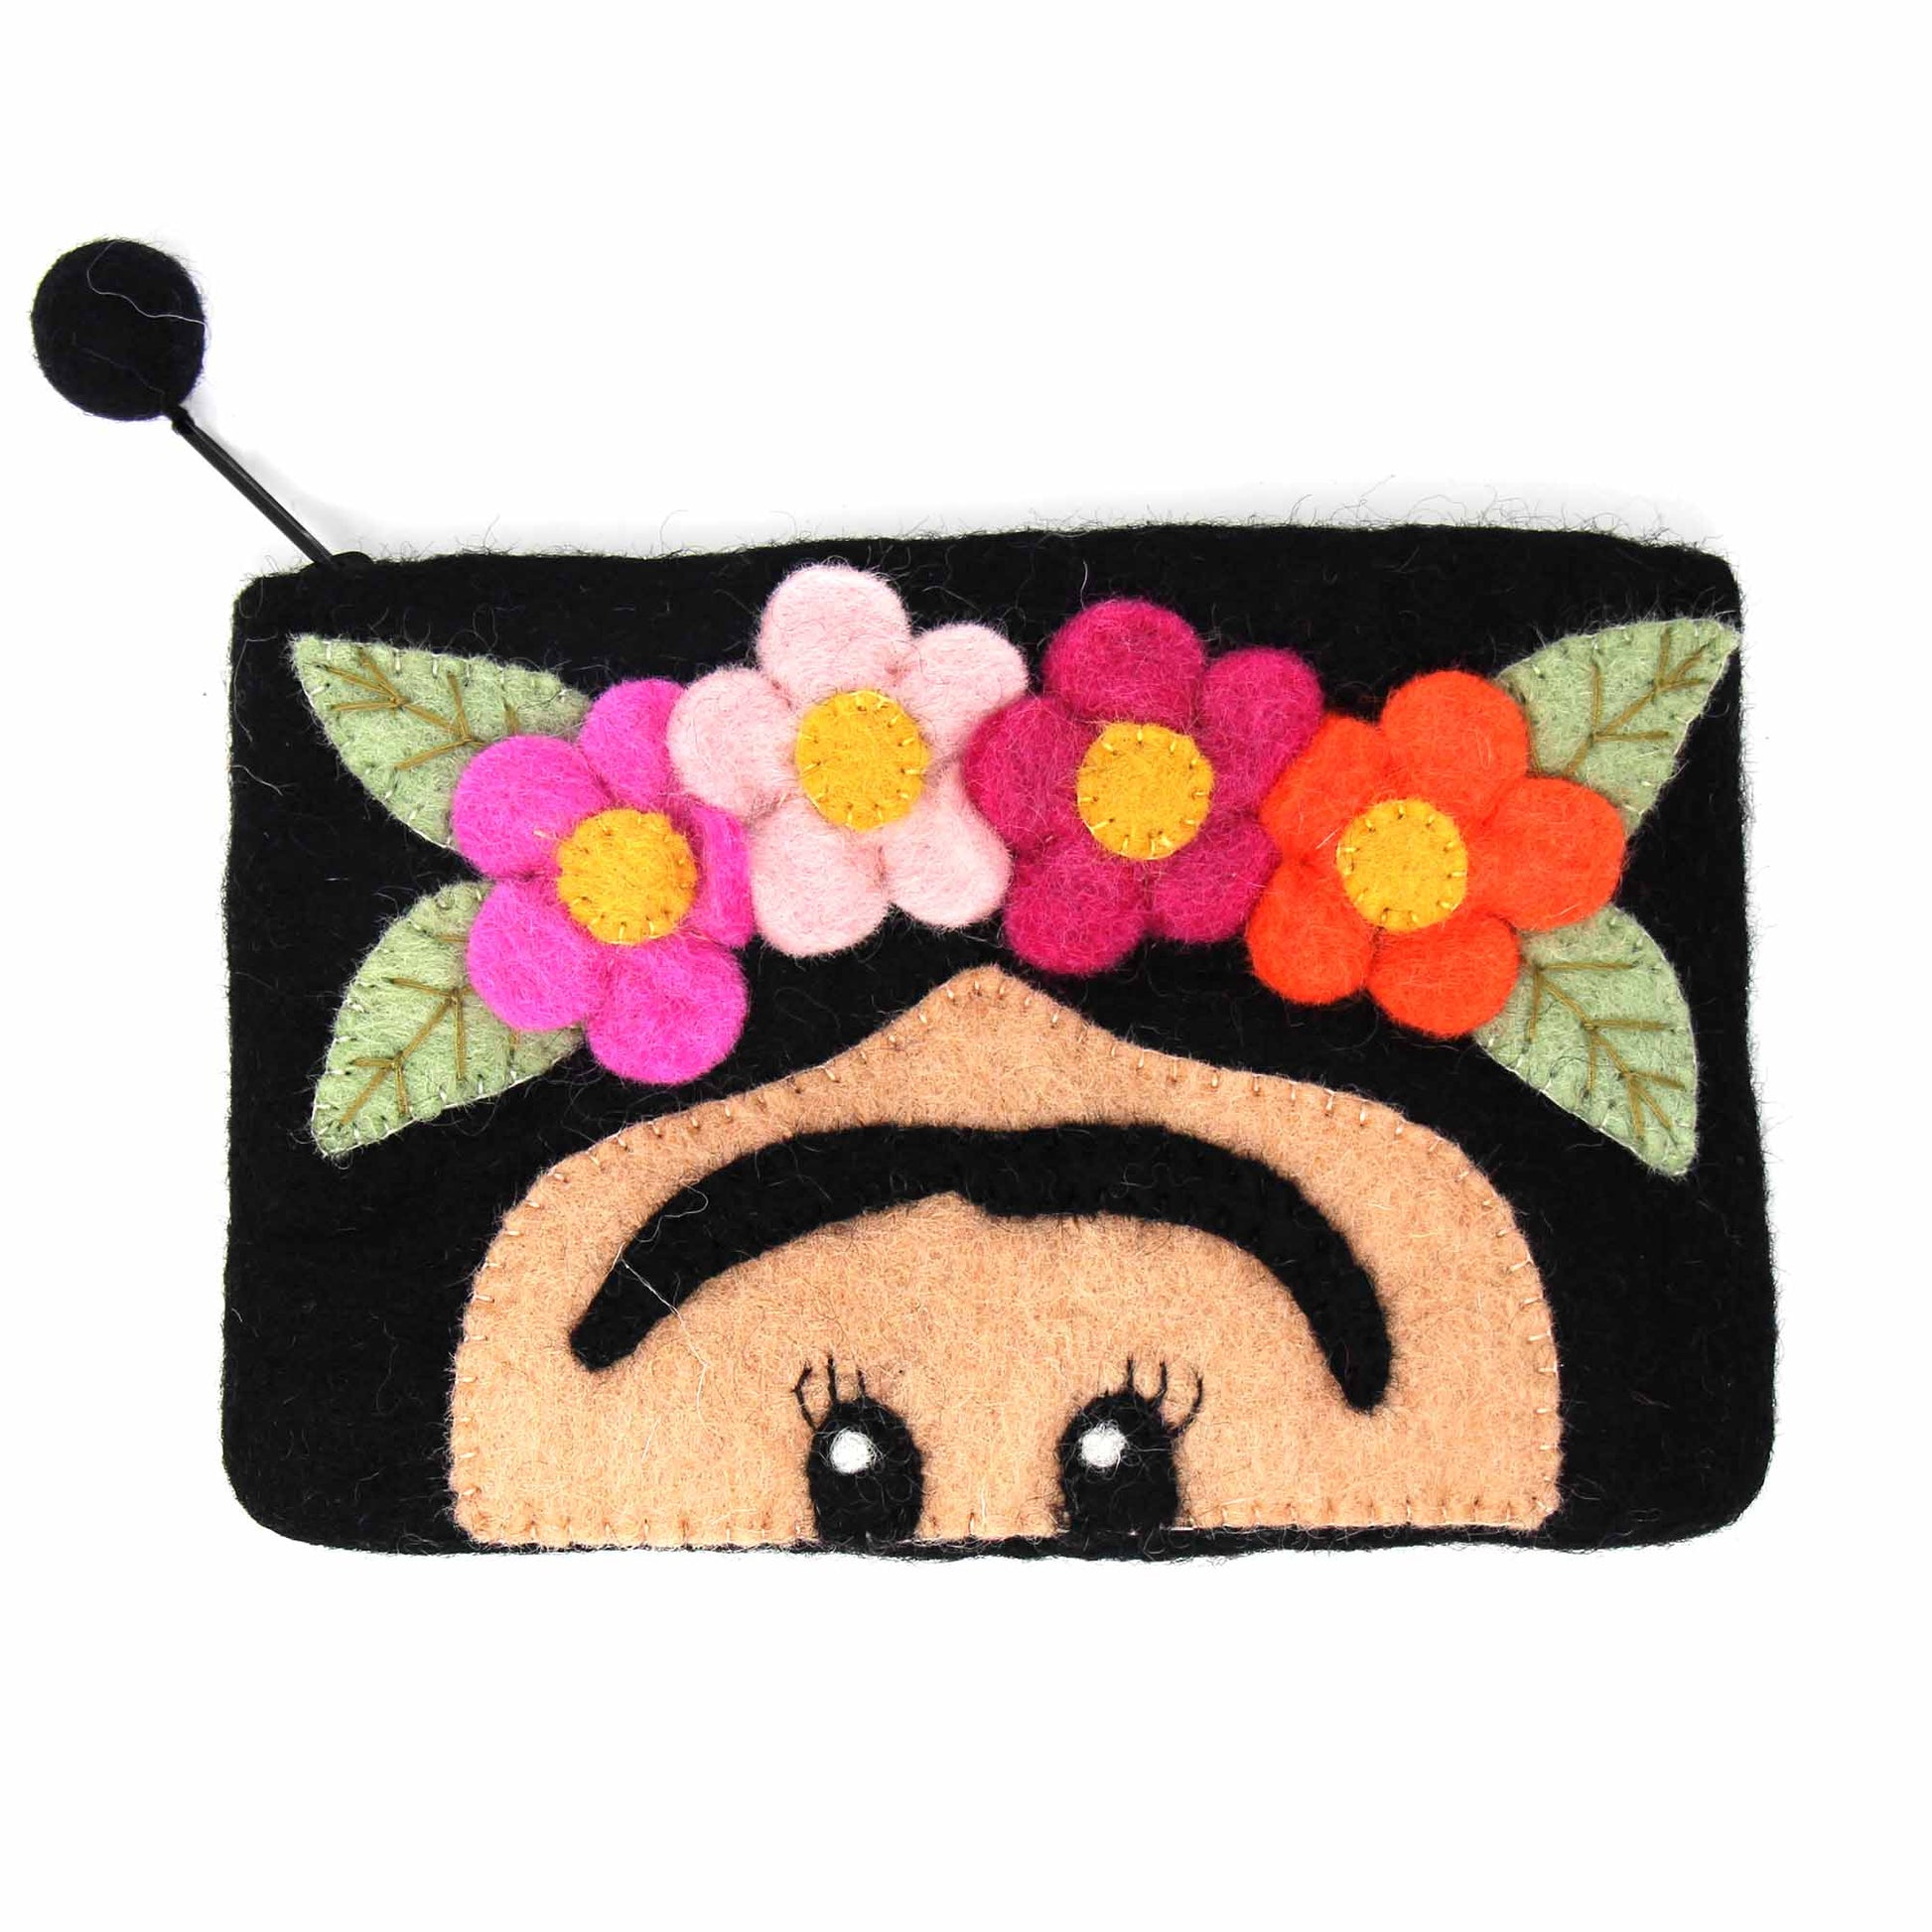 Hand Crafted Felt: Frida Pouch - Linda Kay Gifford’s - Those Nasty Women TALK! by SWEETSurvivor